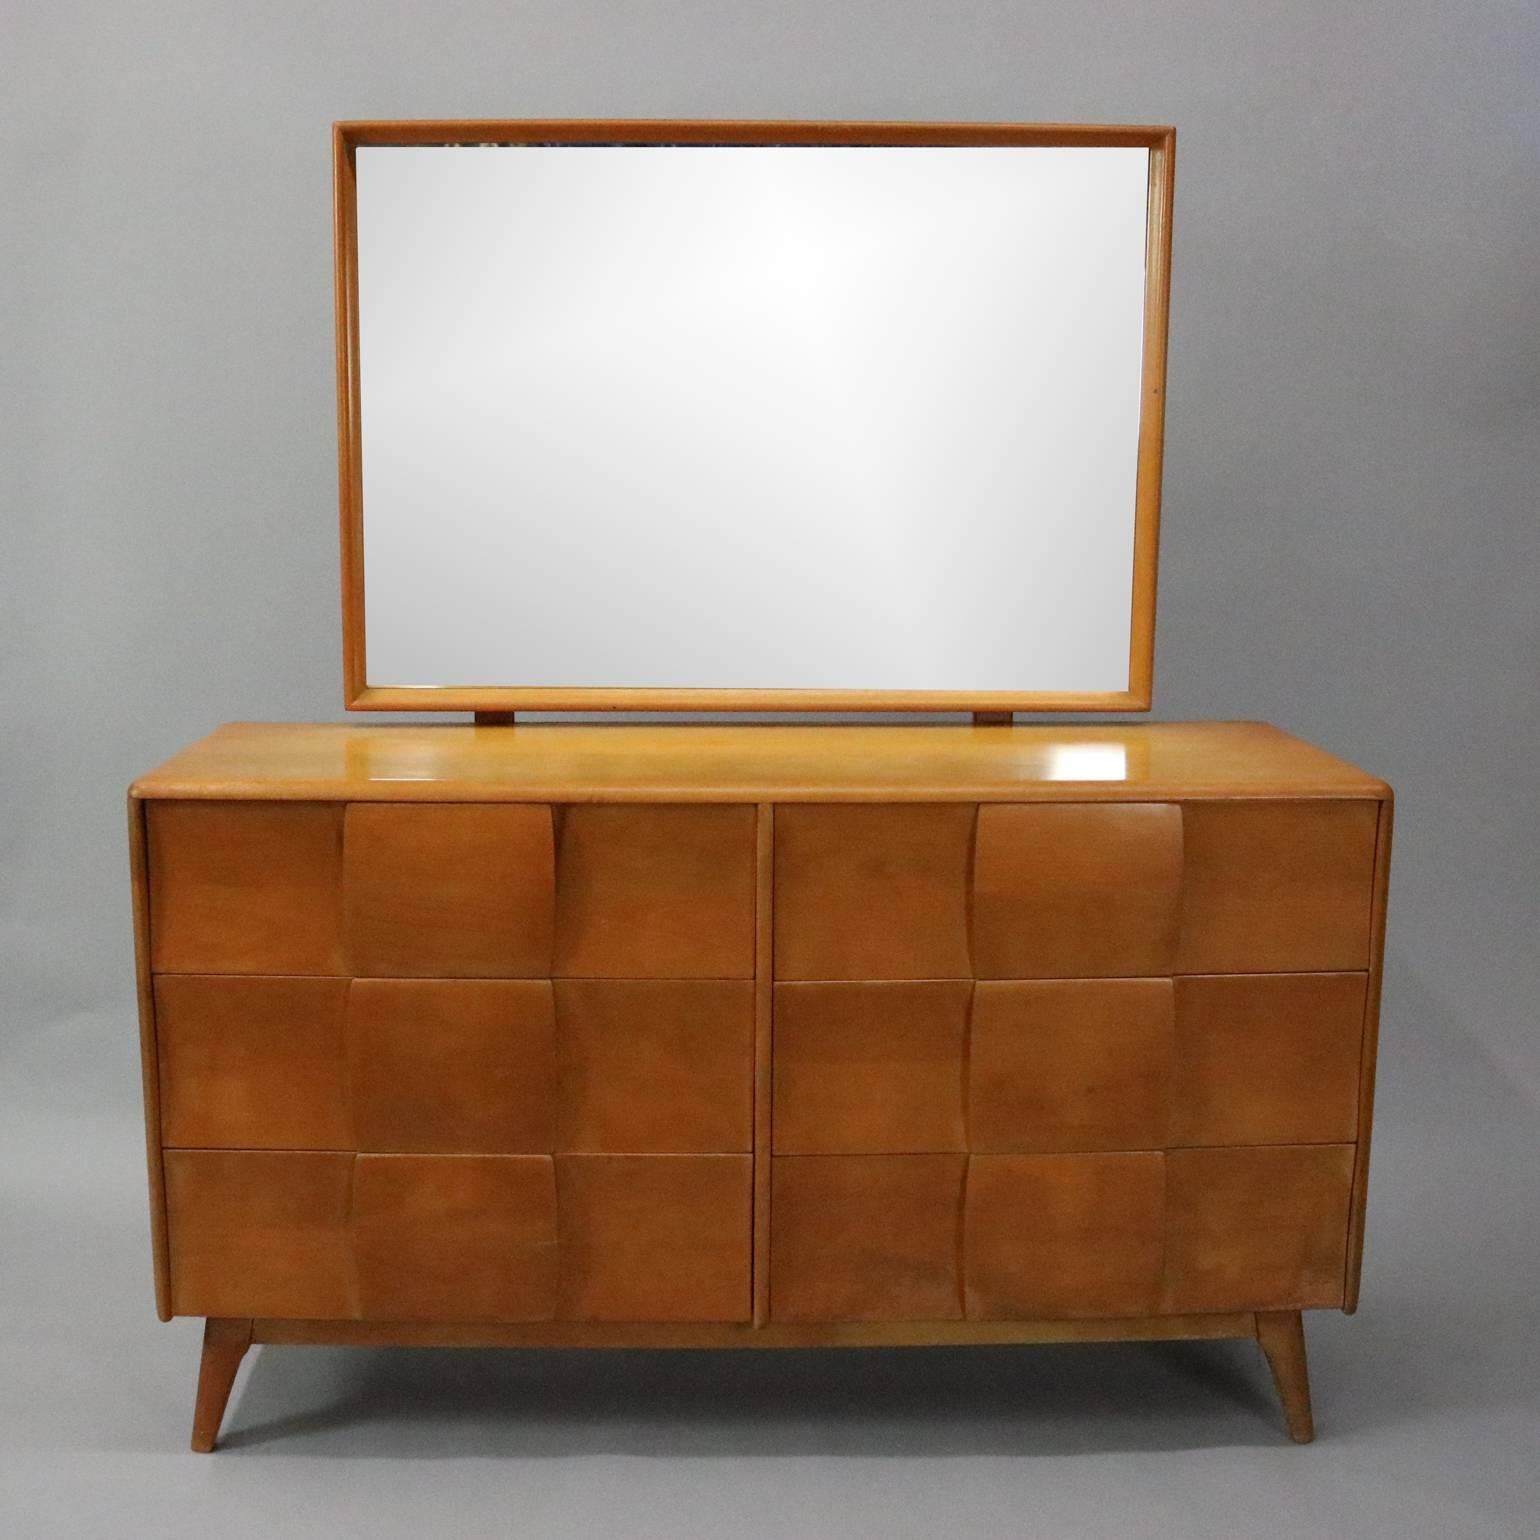 Vintage Heywood-Wakefield Kohinoor six-drawer low chest and mirror features Northern yellow birchwood construction designed by Ernest Herman, circa 1950

Measures: 63" H x 55" W x 19.5" D; 30" H x 41" W